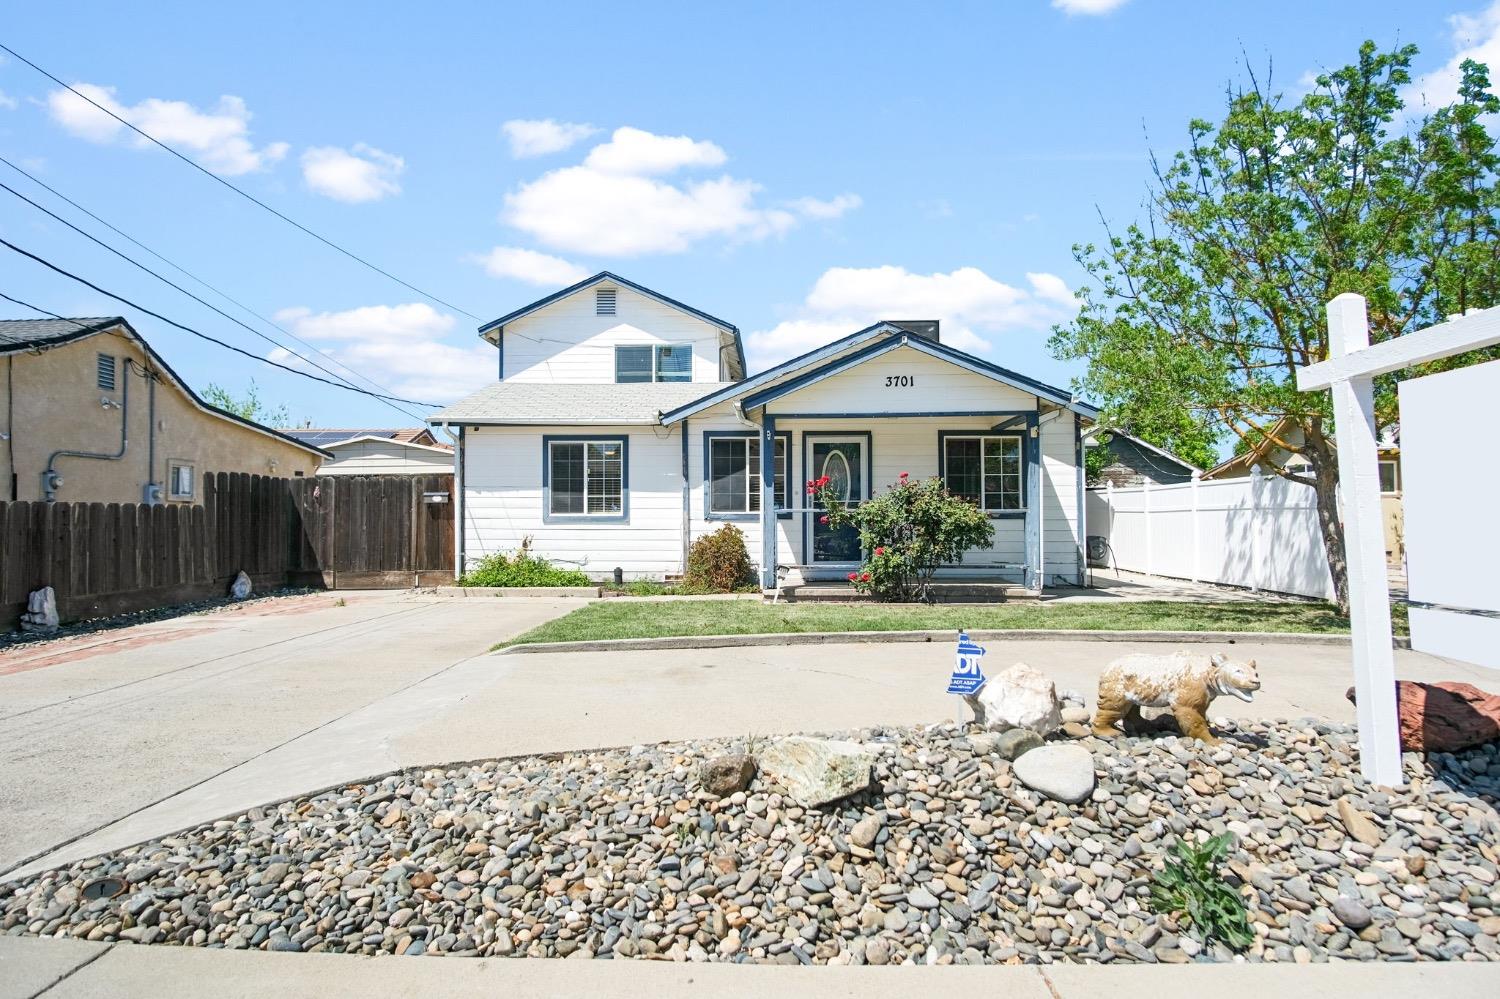 Photo of 3701 Texas Ave in Riverbank, CA